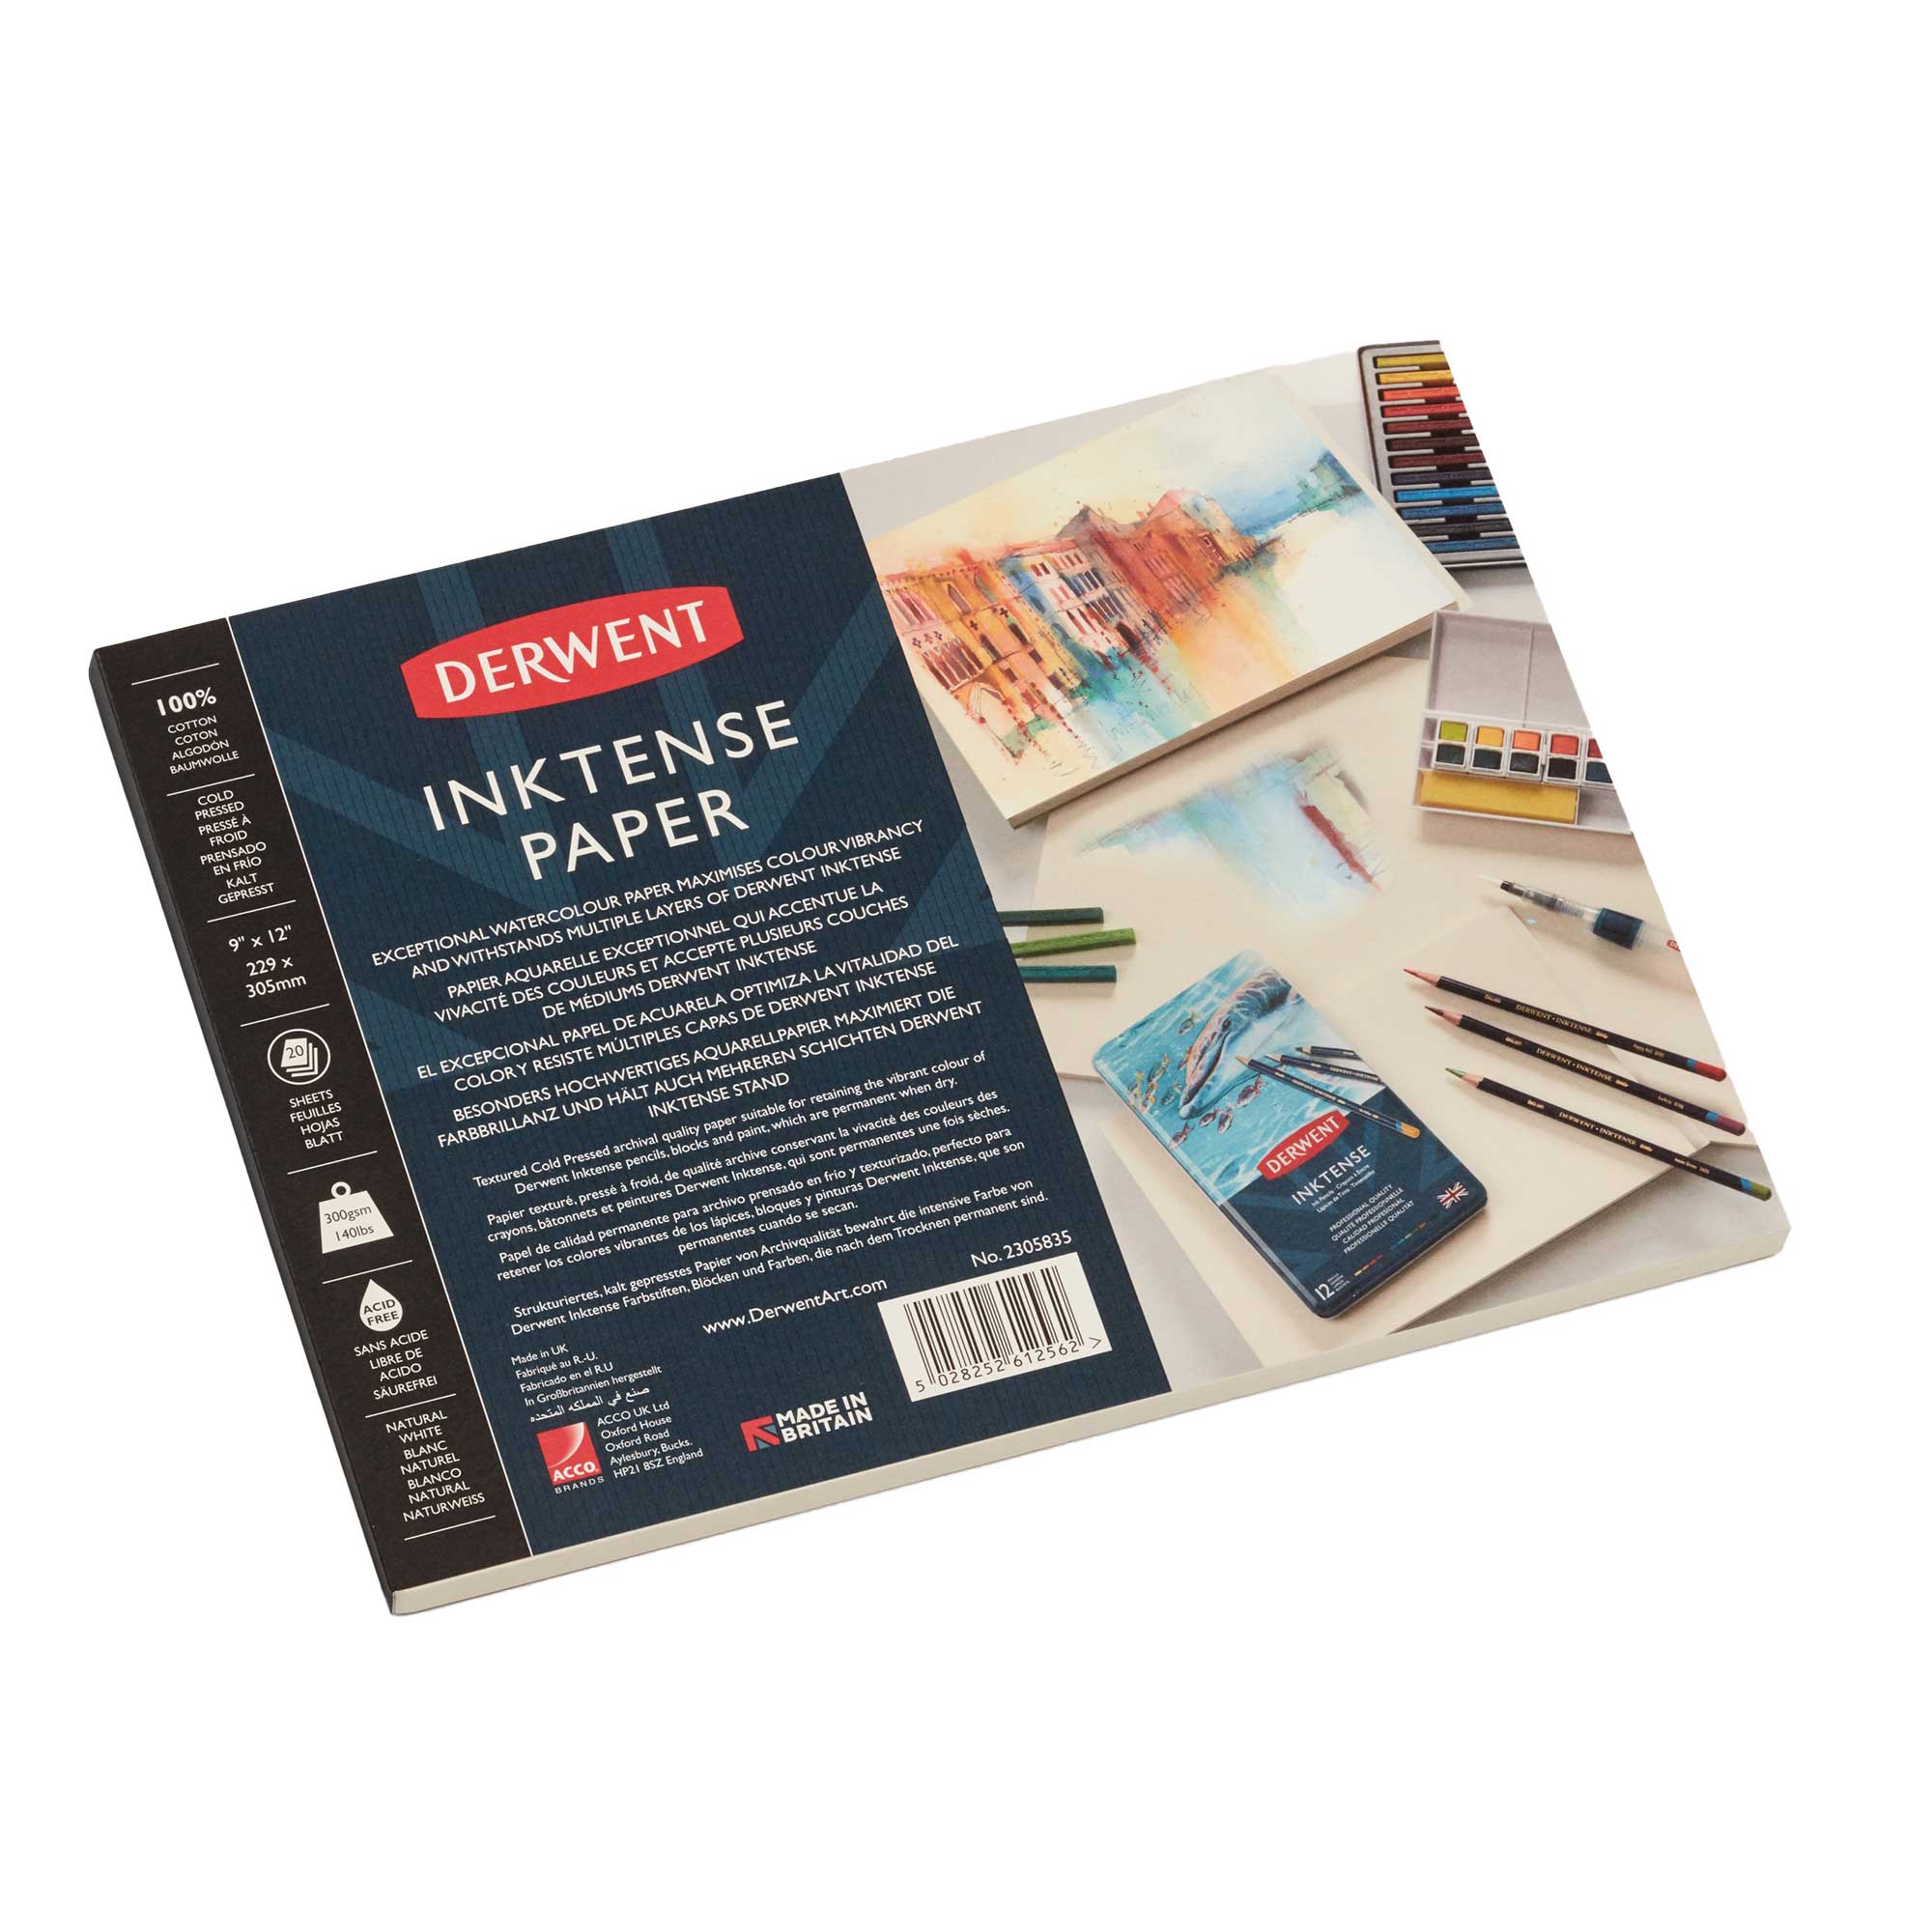 Derwent Inktense Paper Pad - 20 Sheets 300gsm/ 140lbs - 9x12 inches